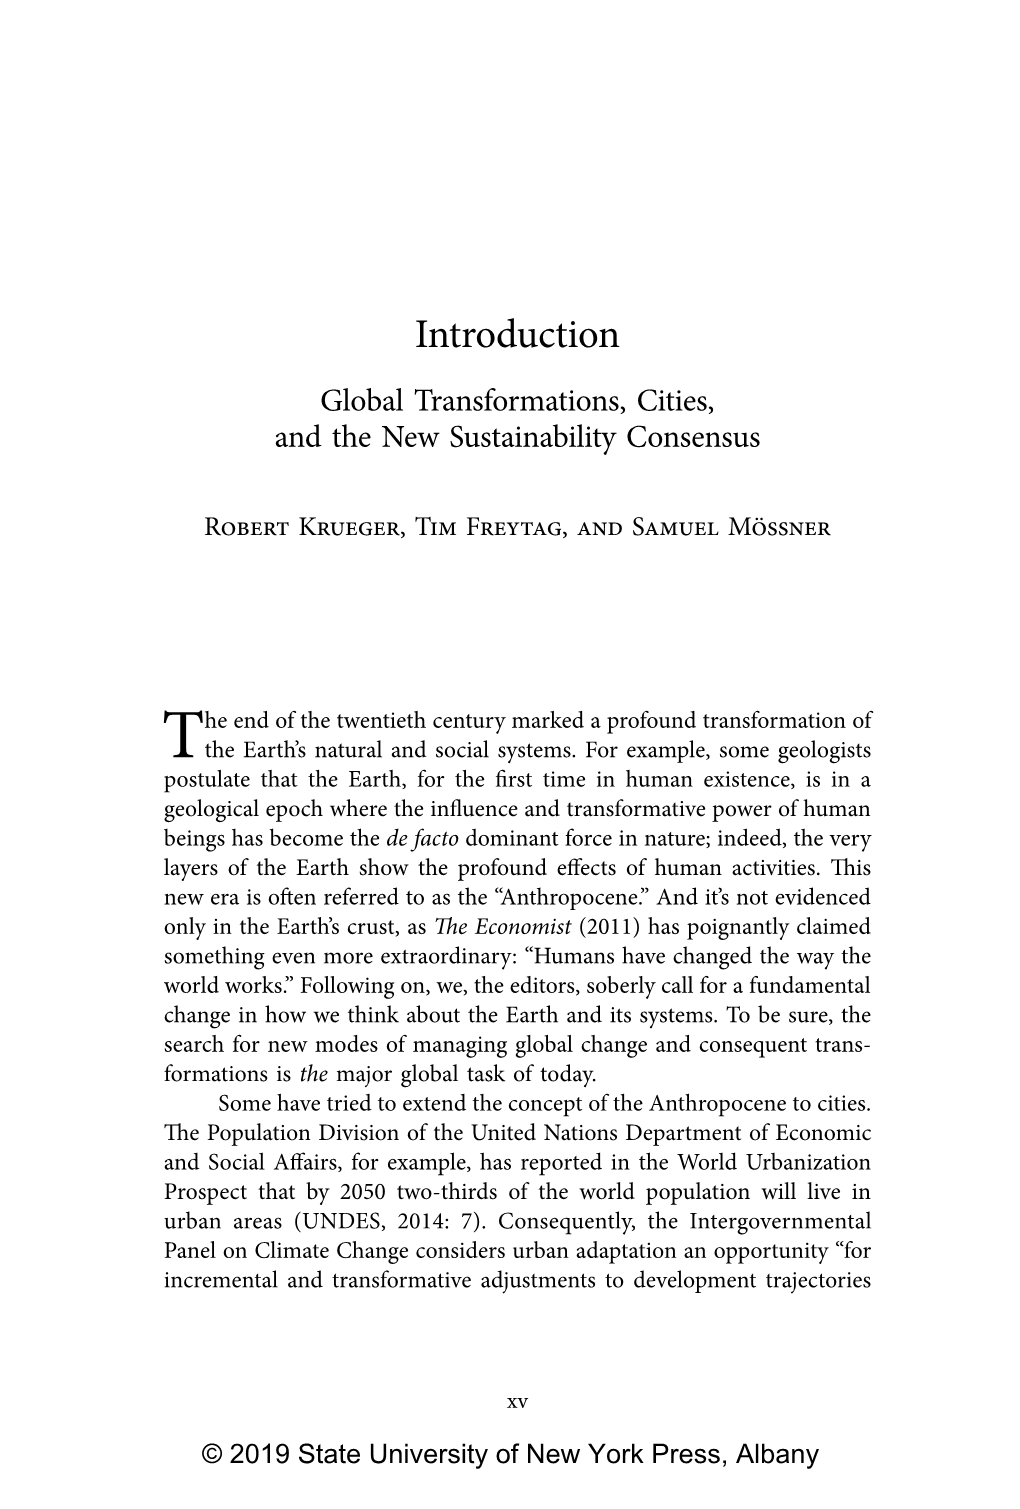 Introduction Global Transformations, Cities, and the New Sustainability Consensus